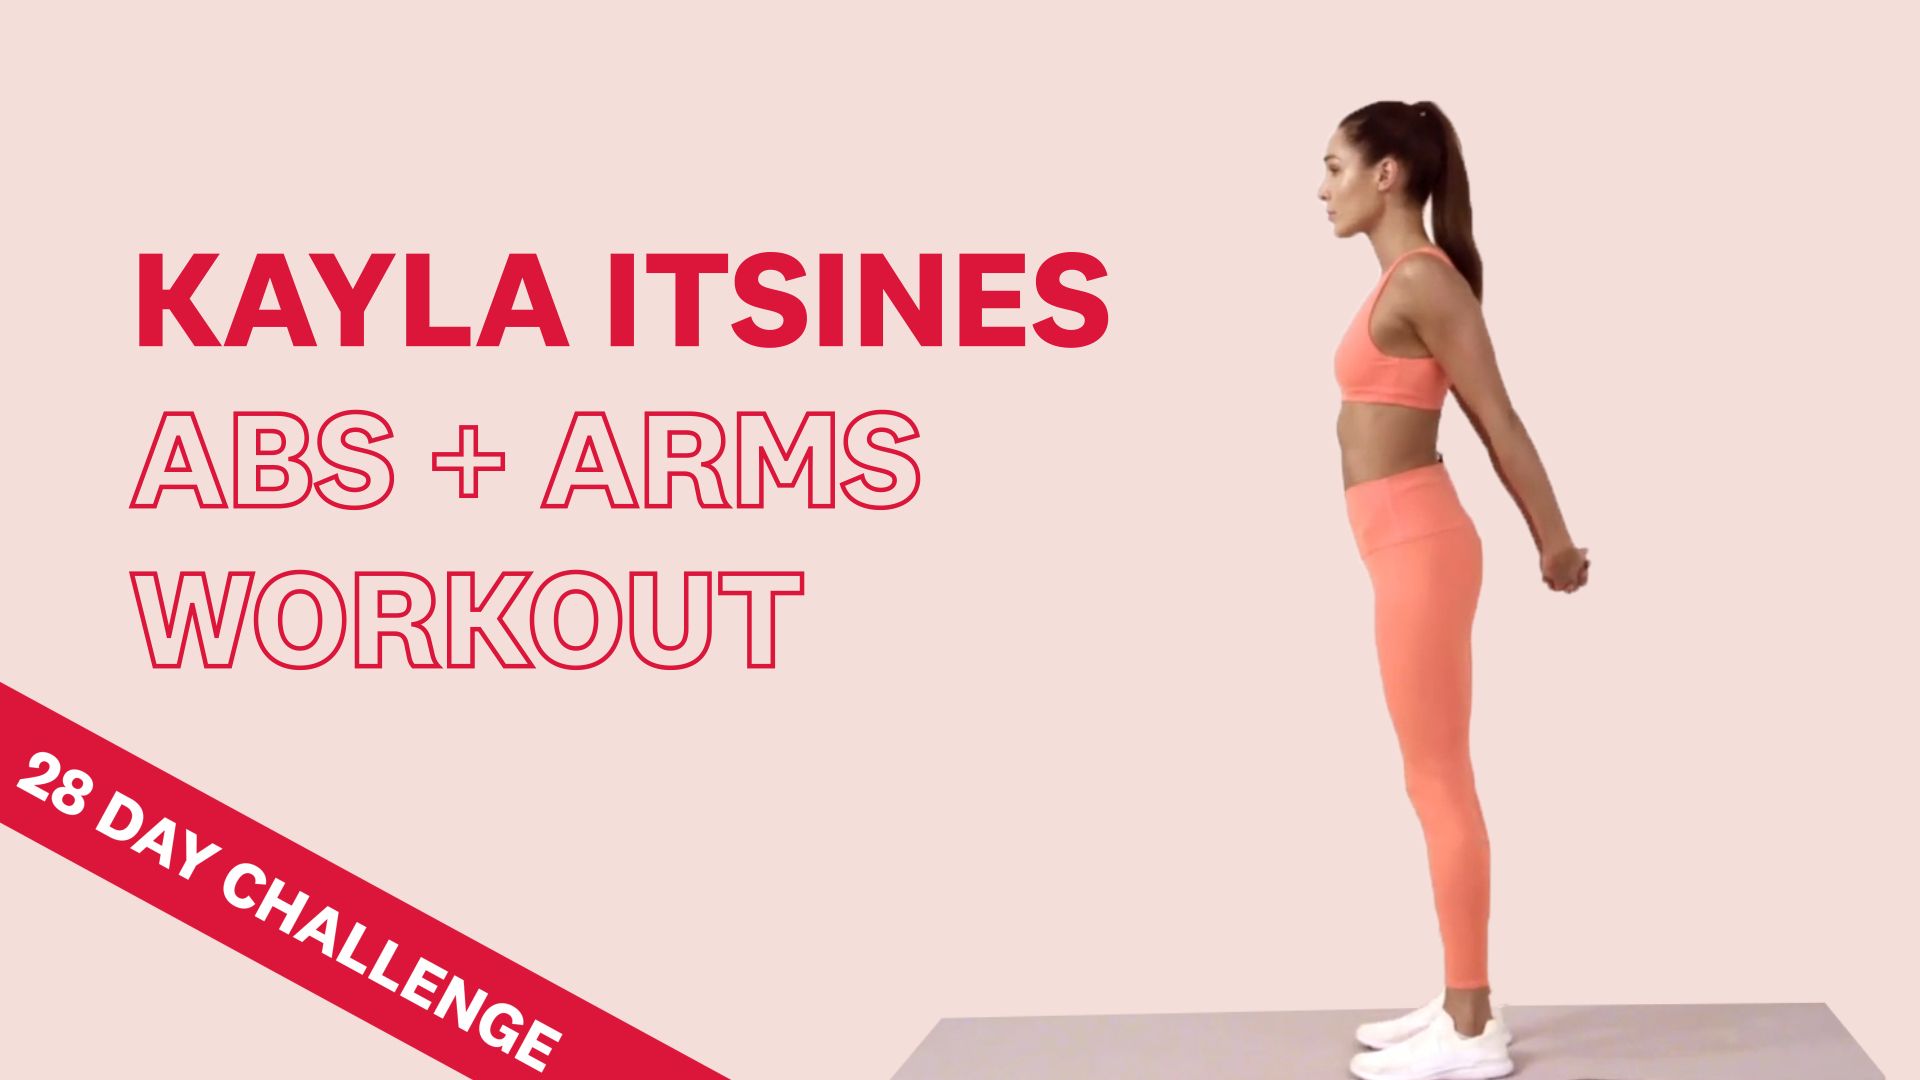 Kayla Itsines' 28-day Home Workout Plan - No Kit Needed